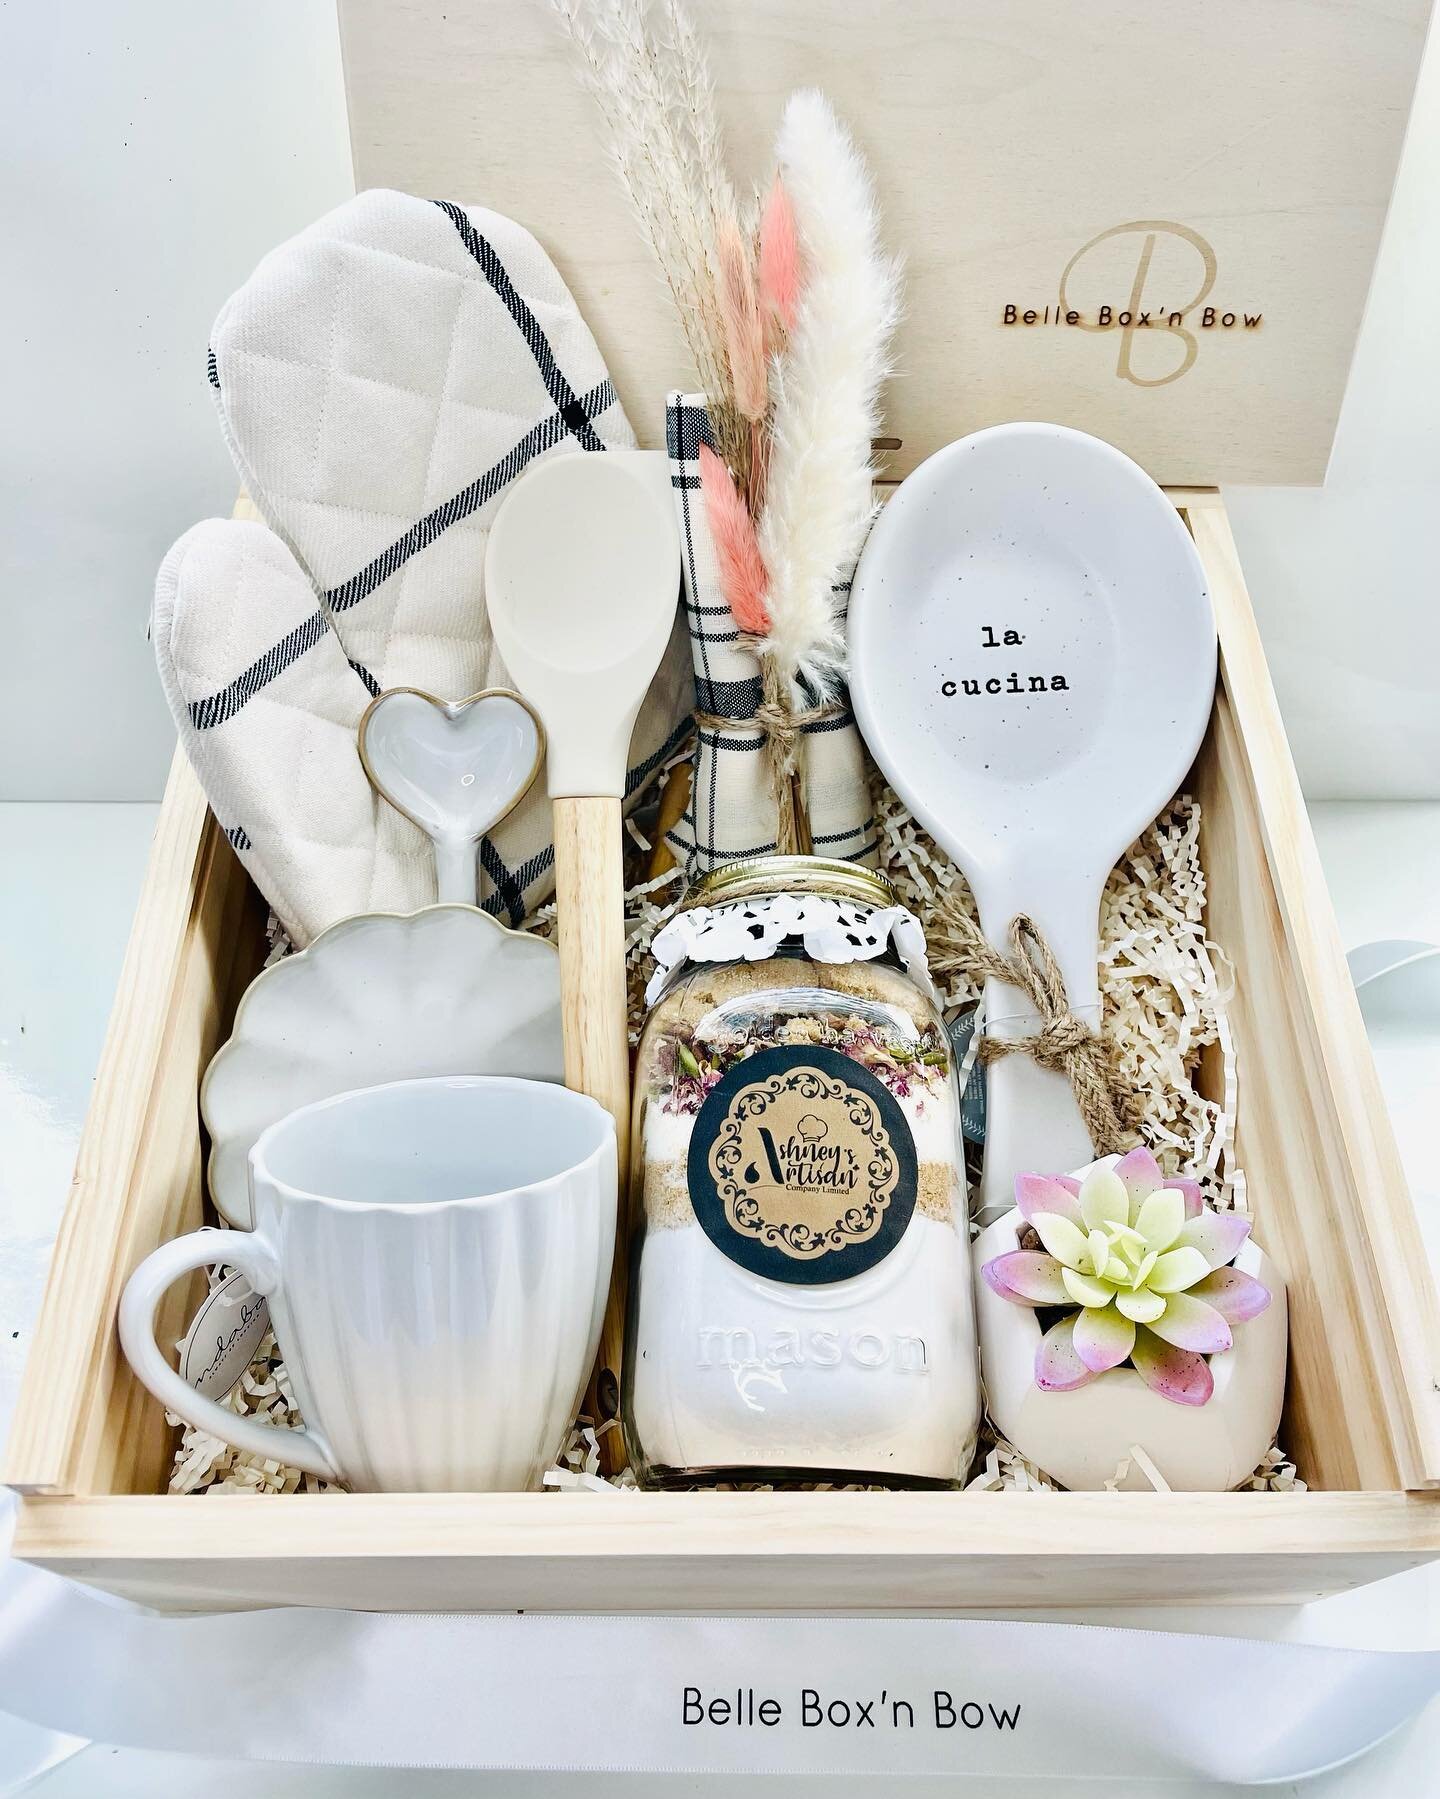 The Kitchen Essentials Gift Box is an ideal gift for the foodie in your life. Enjoy our delicious cookie mix in a jar from  @ashneys_kitchen_stories 
A perfect gift option for family, friends, and new home owners. 

#giftboxes #giftideas #curatedgift